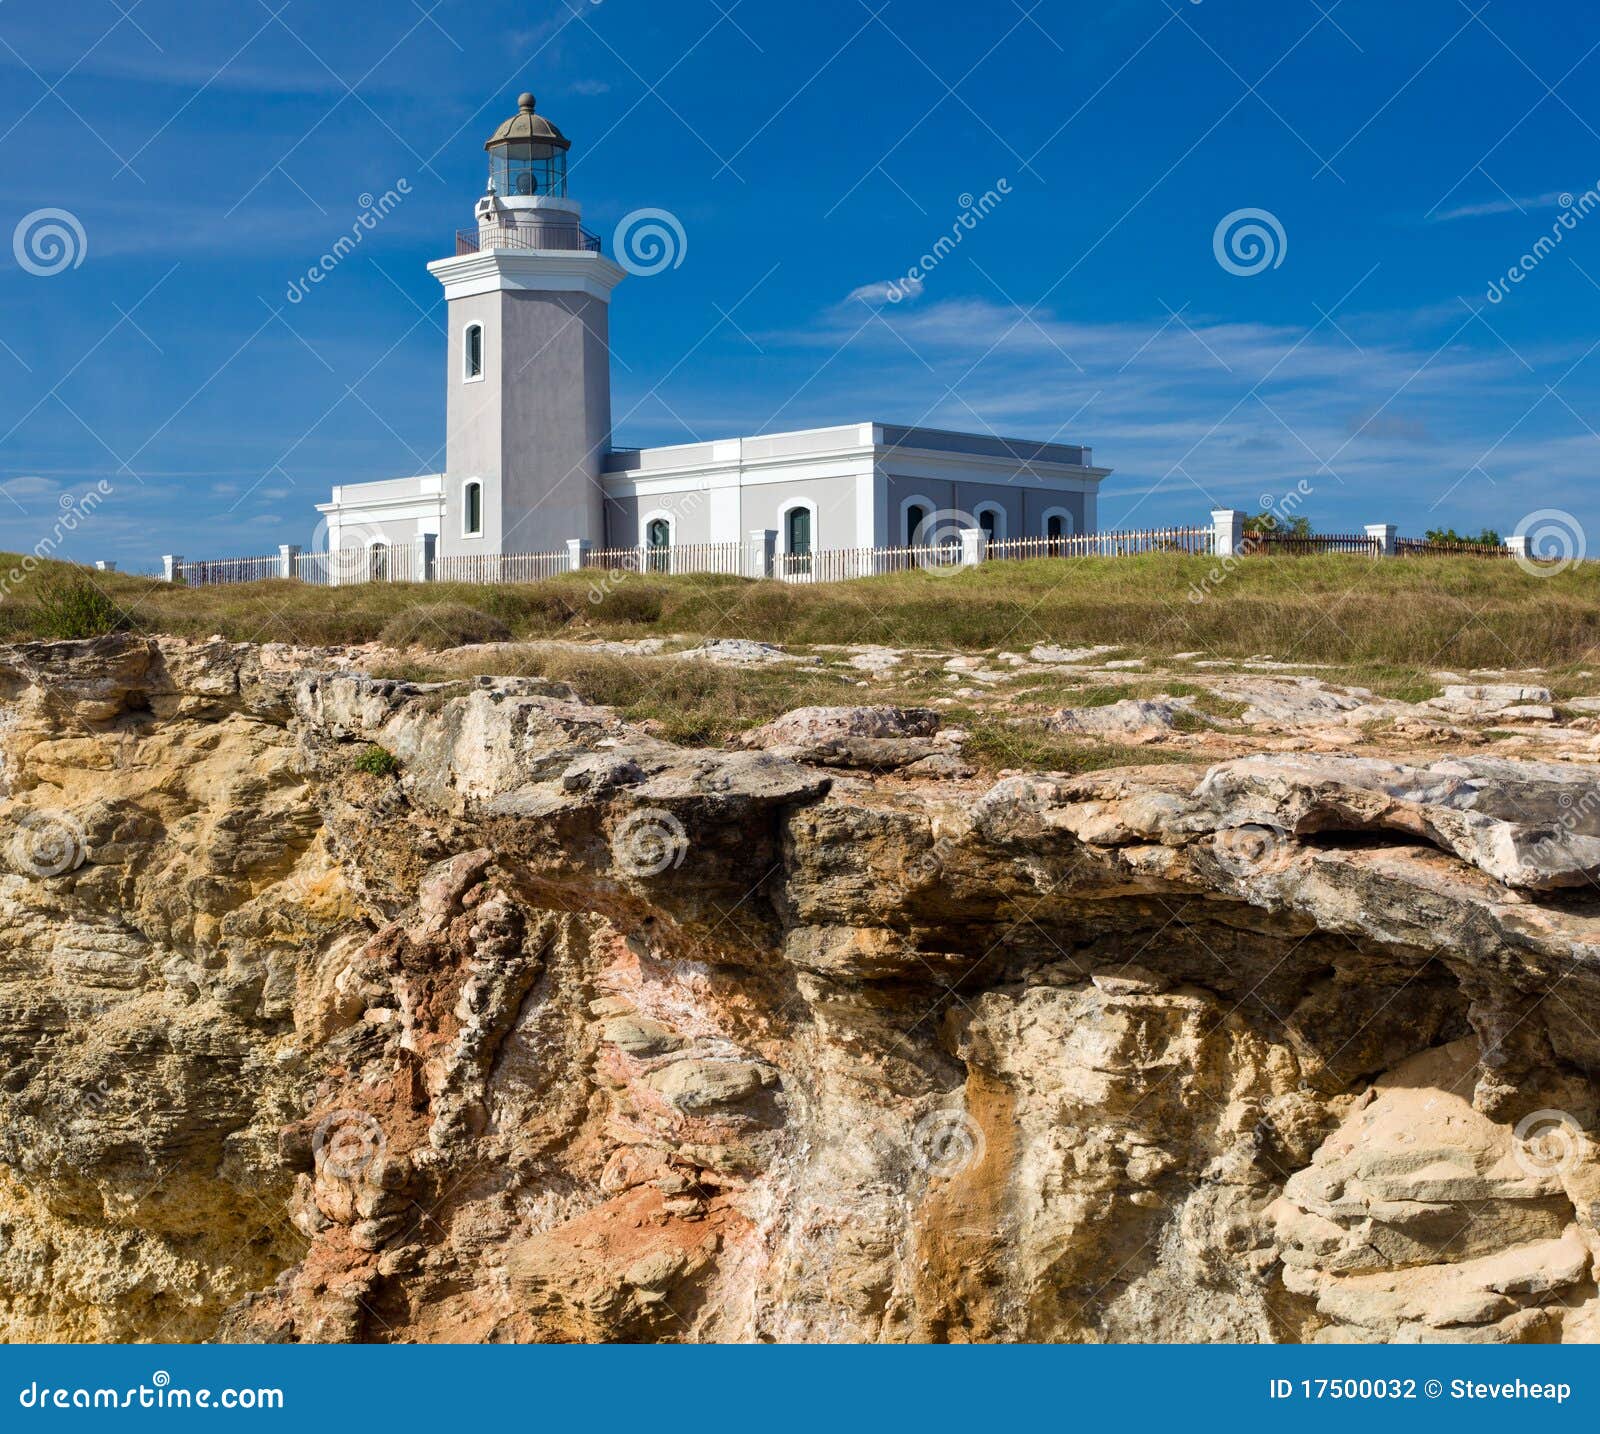 old lighthouse at cabo rojo